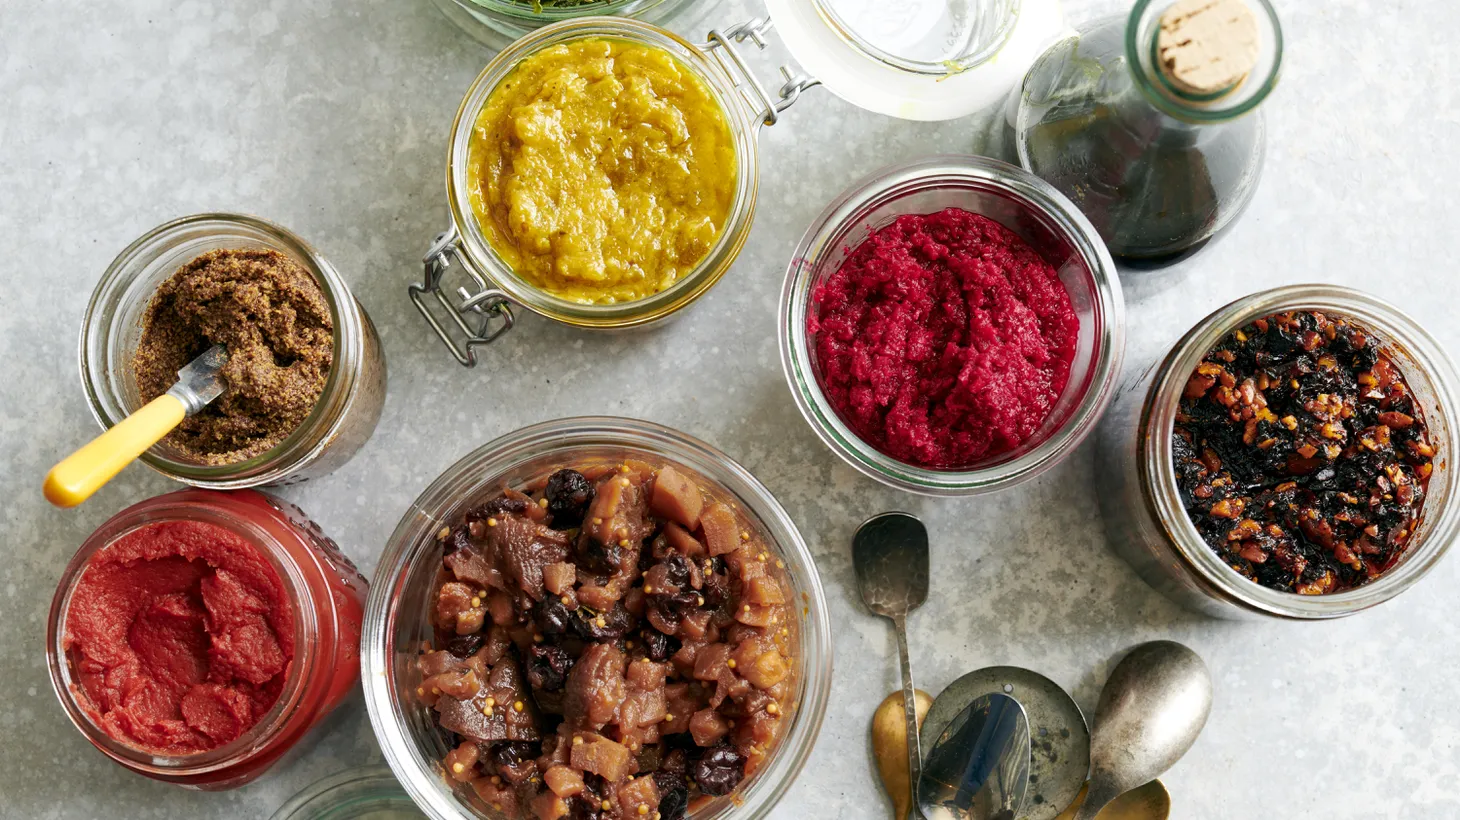 The word "condiment" comes from the Latin "condire," which means to preserve or season.